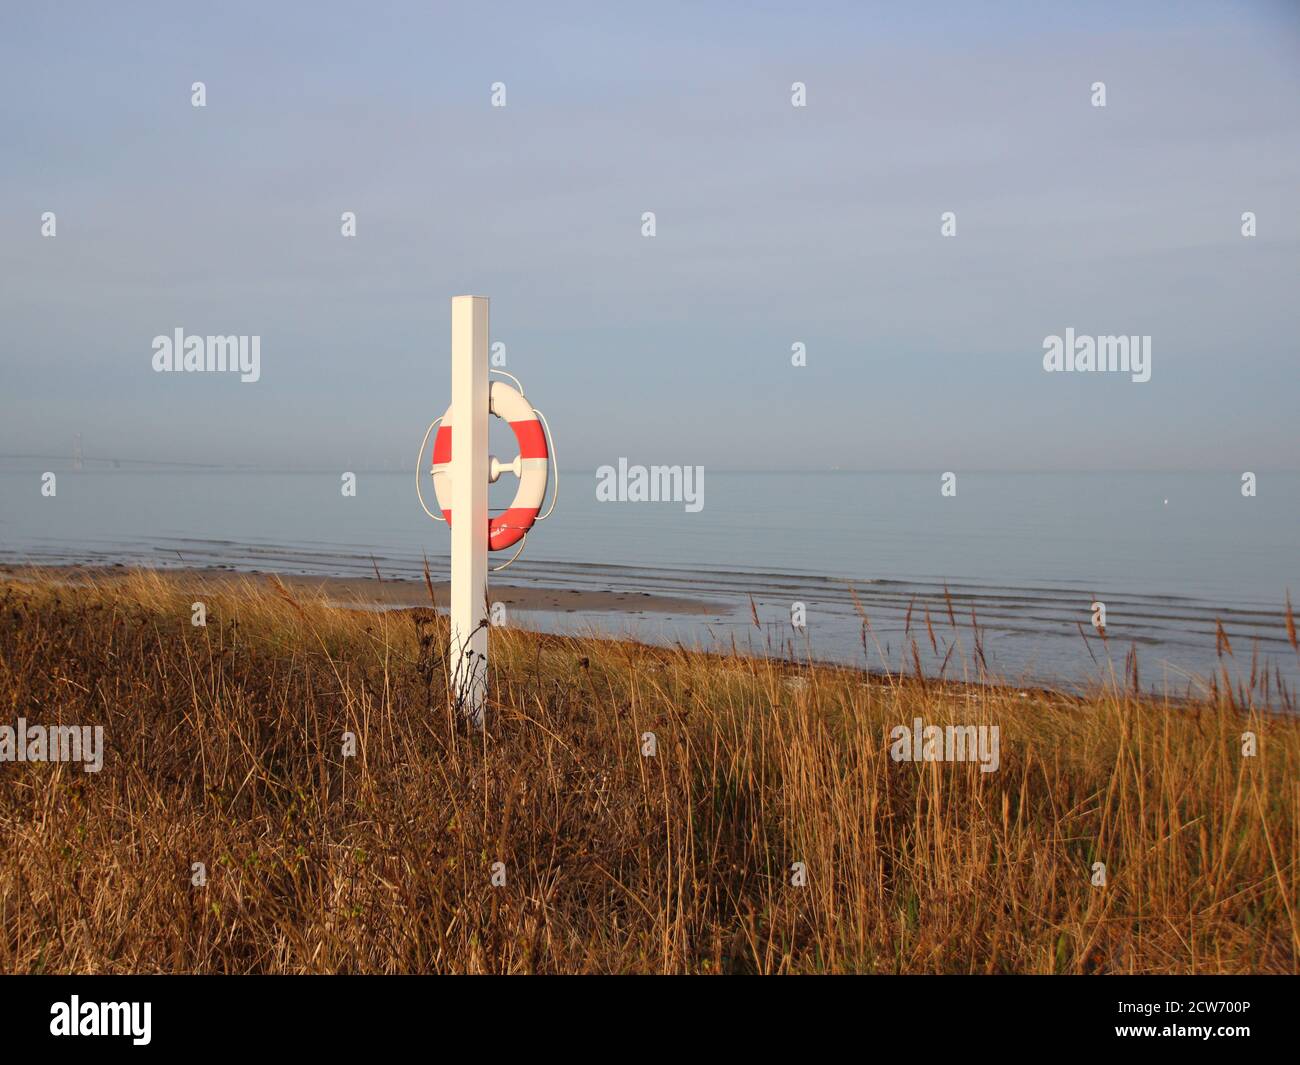 A white and orance lifesaver on a white pole near the ocean. The pole stands on grass and you can see sand and the sea in the background. Stock Photo